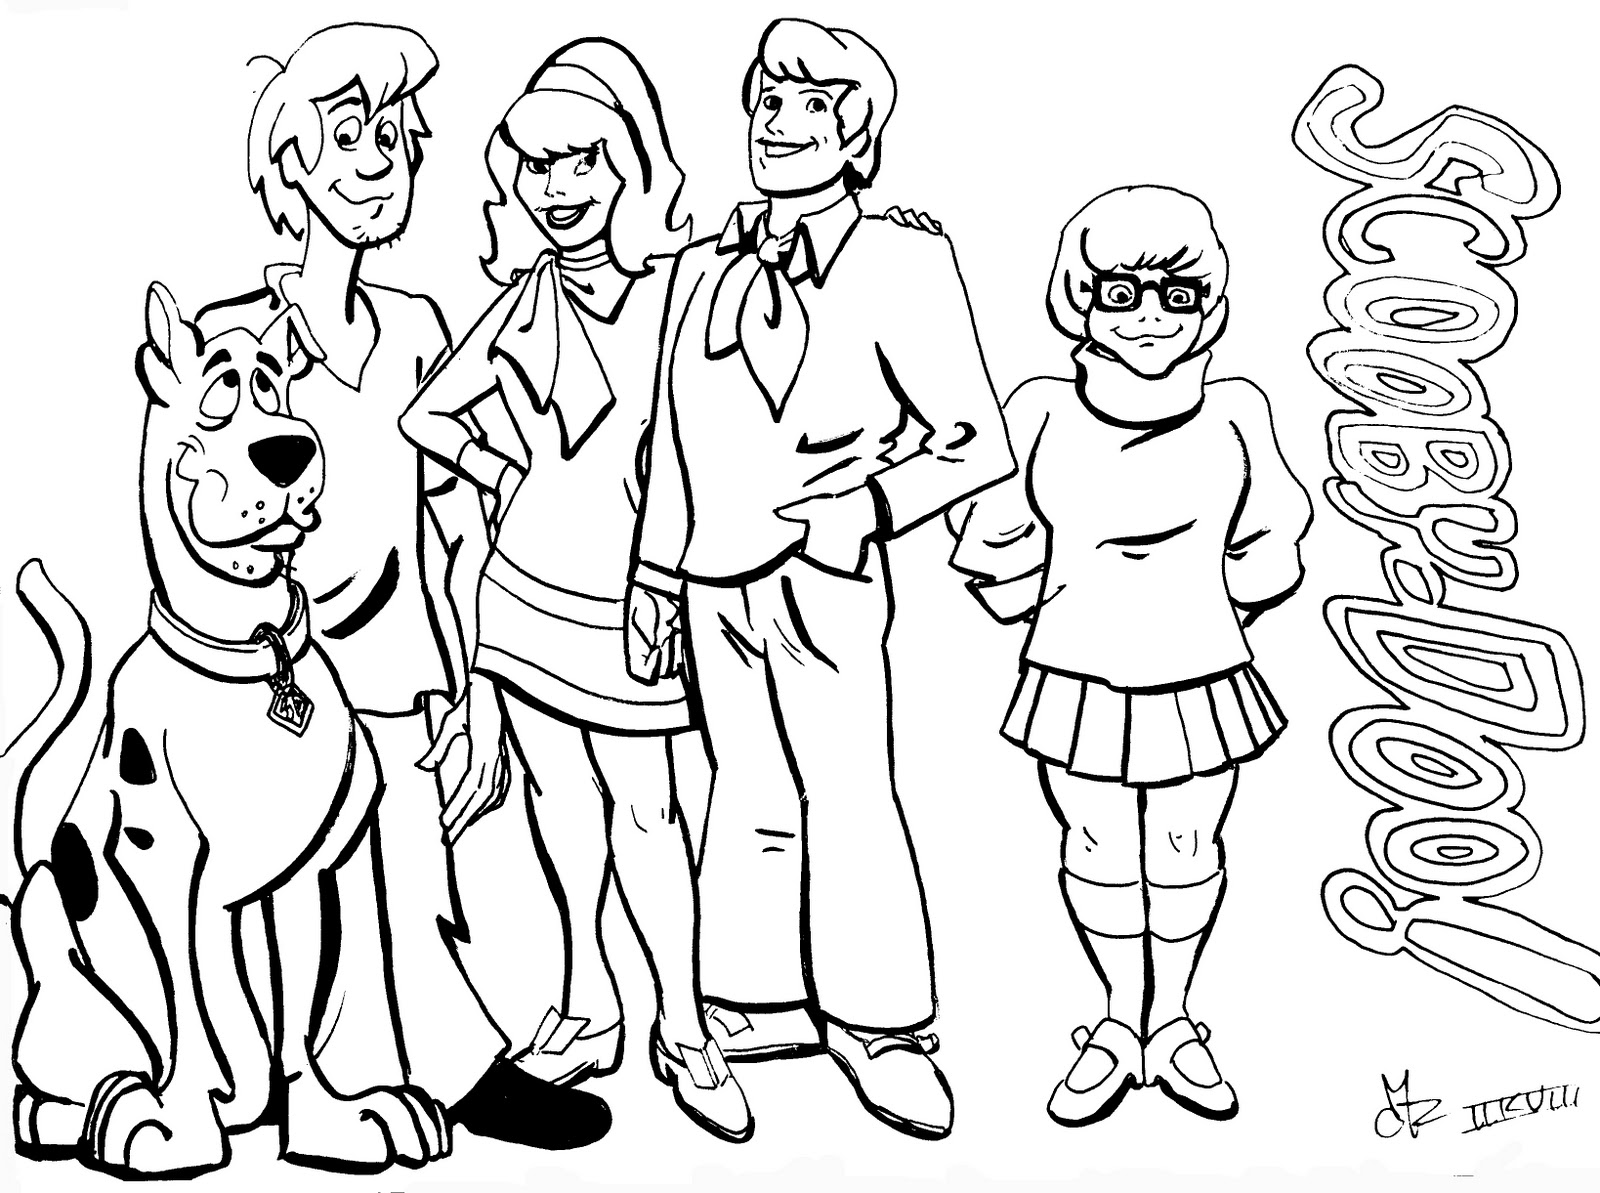 Scooby doo coloring pages for kids Scooby Doo Kids Coloring Pages